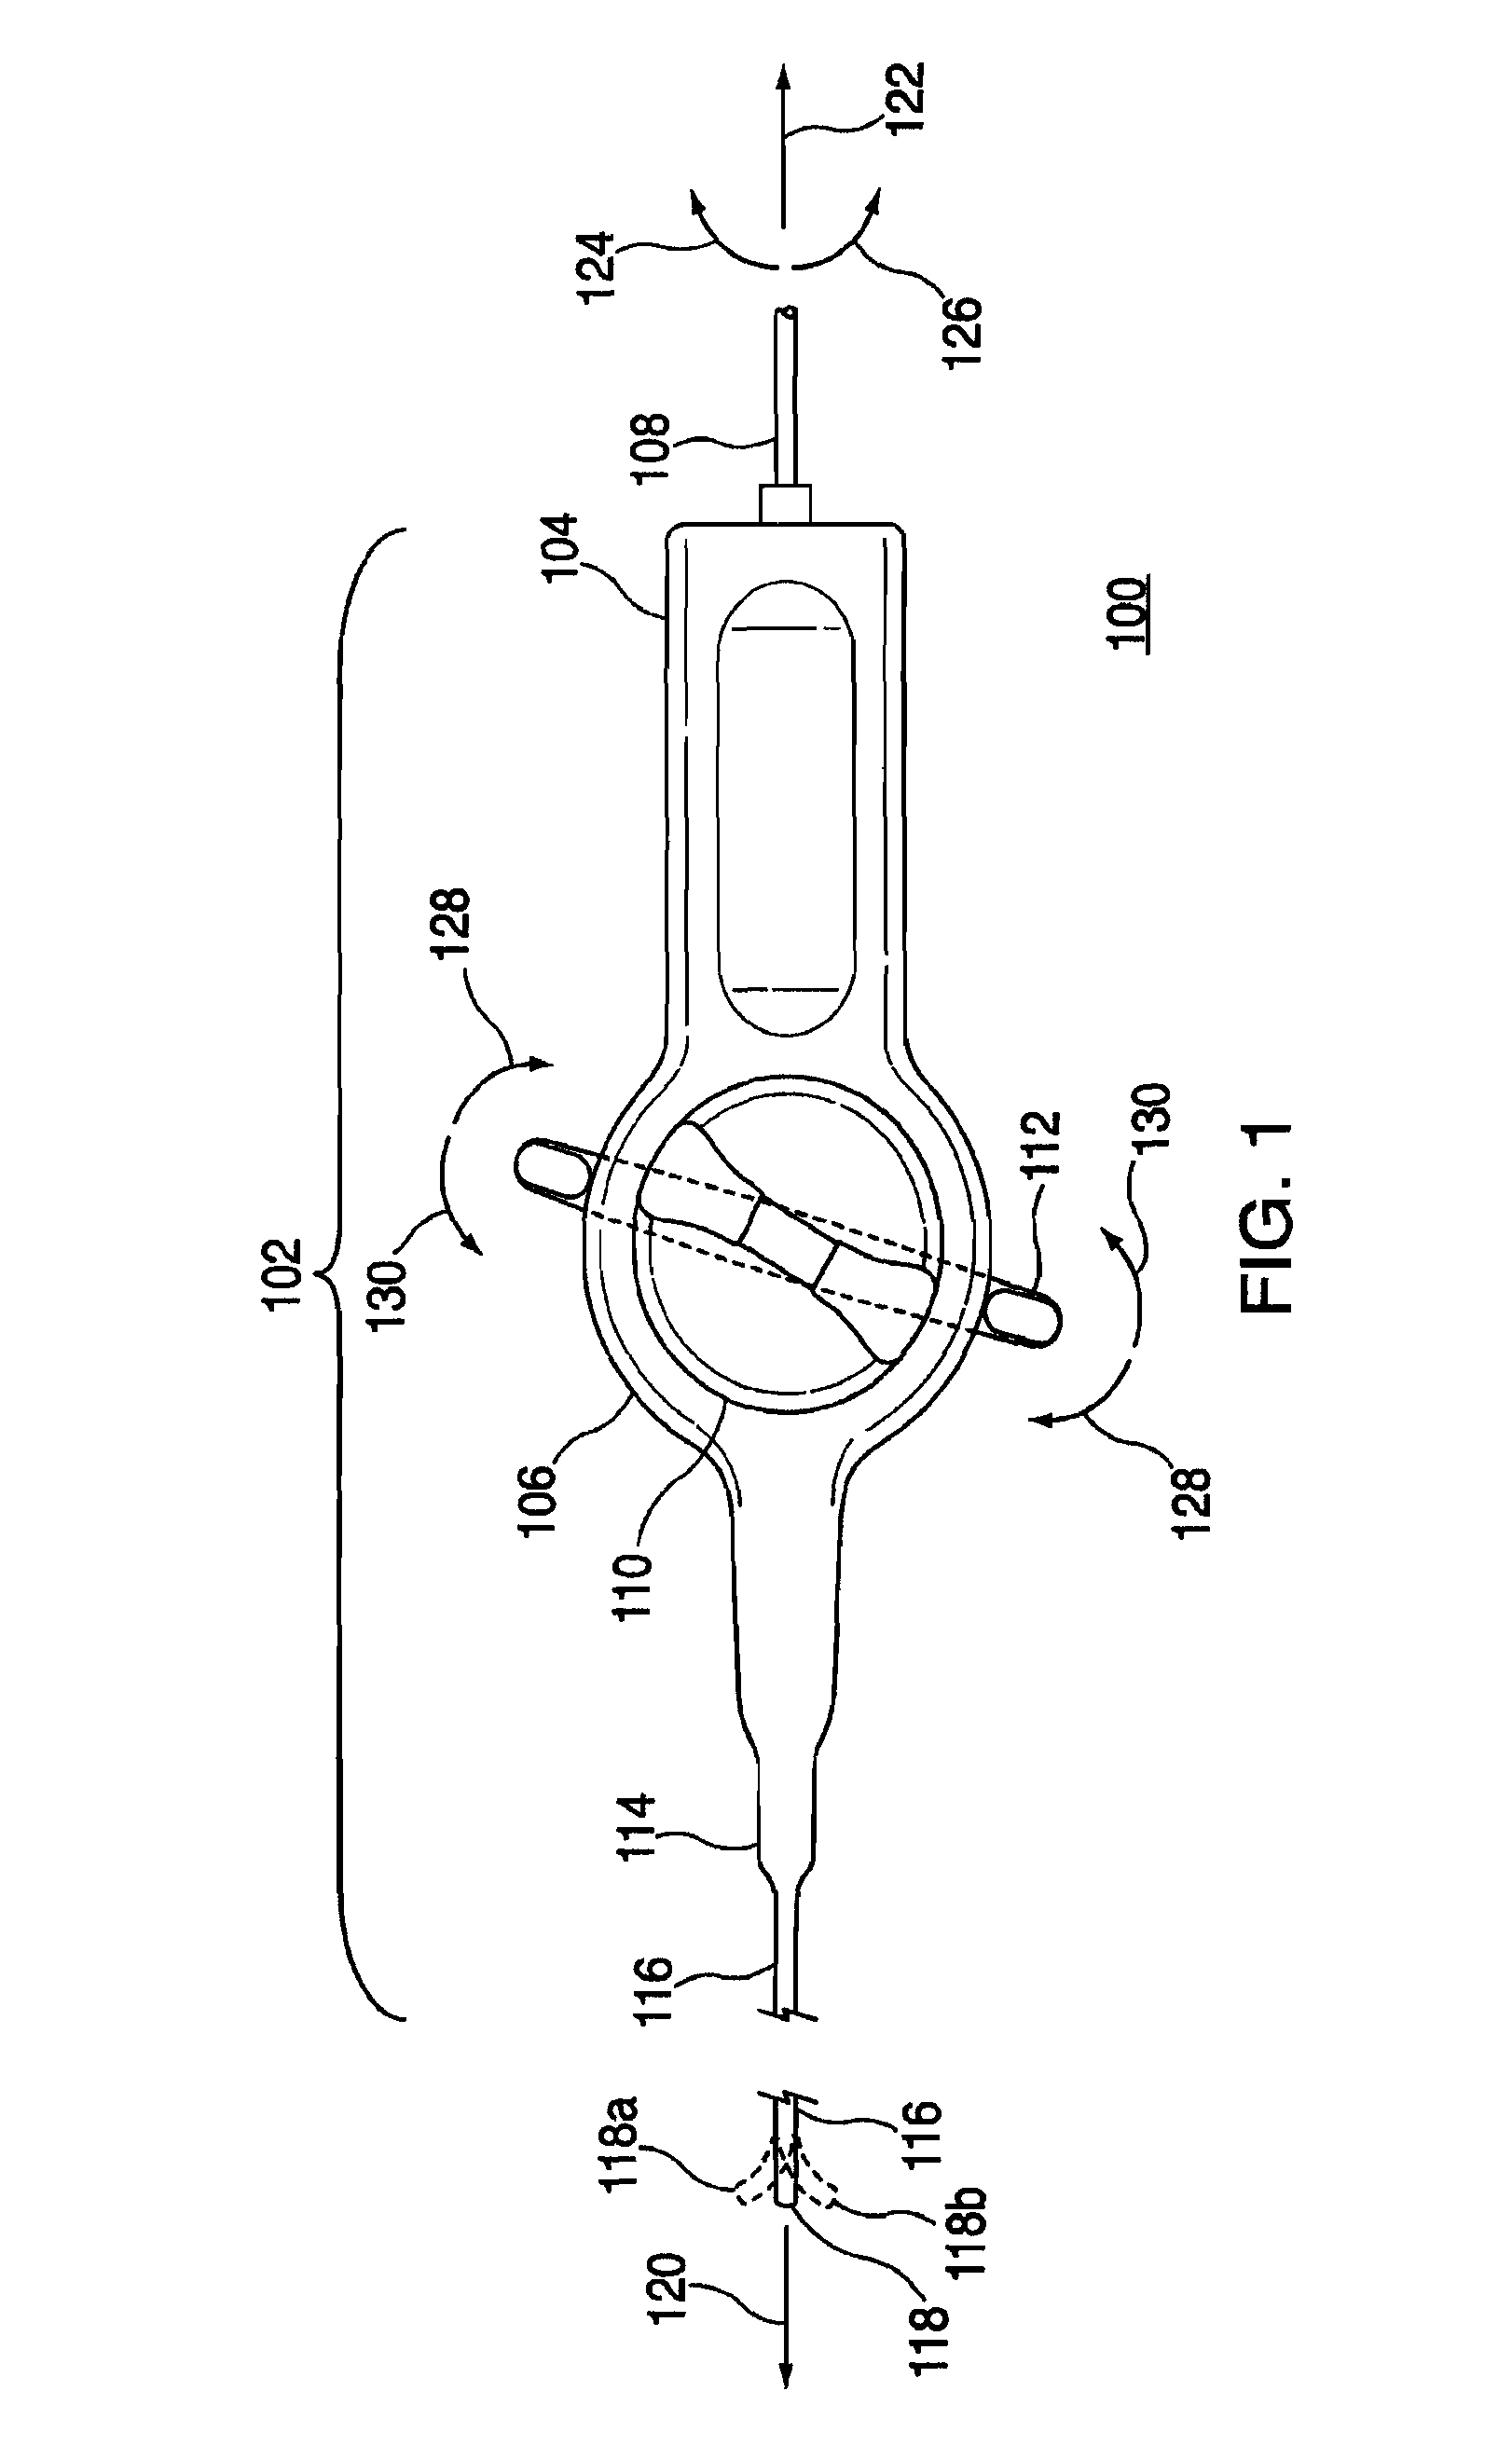 Remotely controlled catheter insertion system